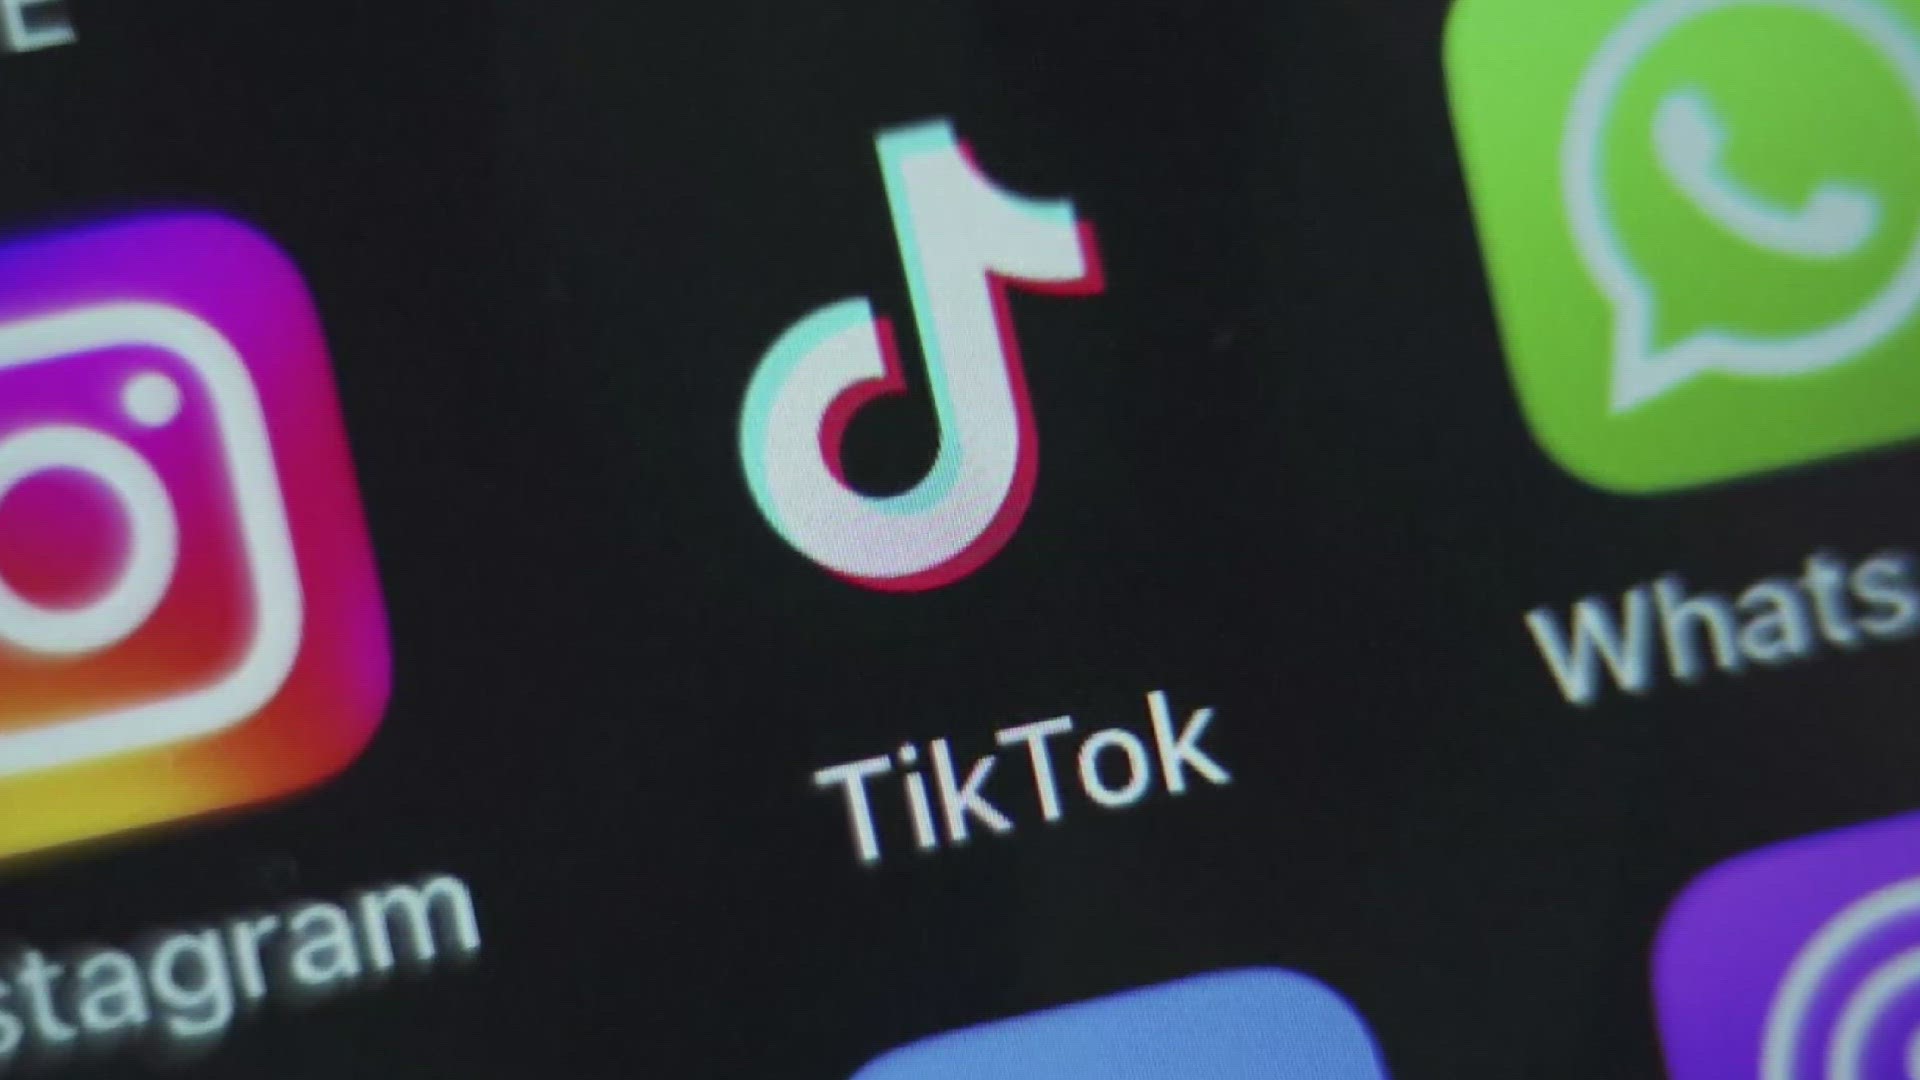 House Republicans included TikTok as part of a foreign aid package that was a priority for Biden and had broad congressional support for Ukraine and Israel.